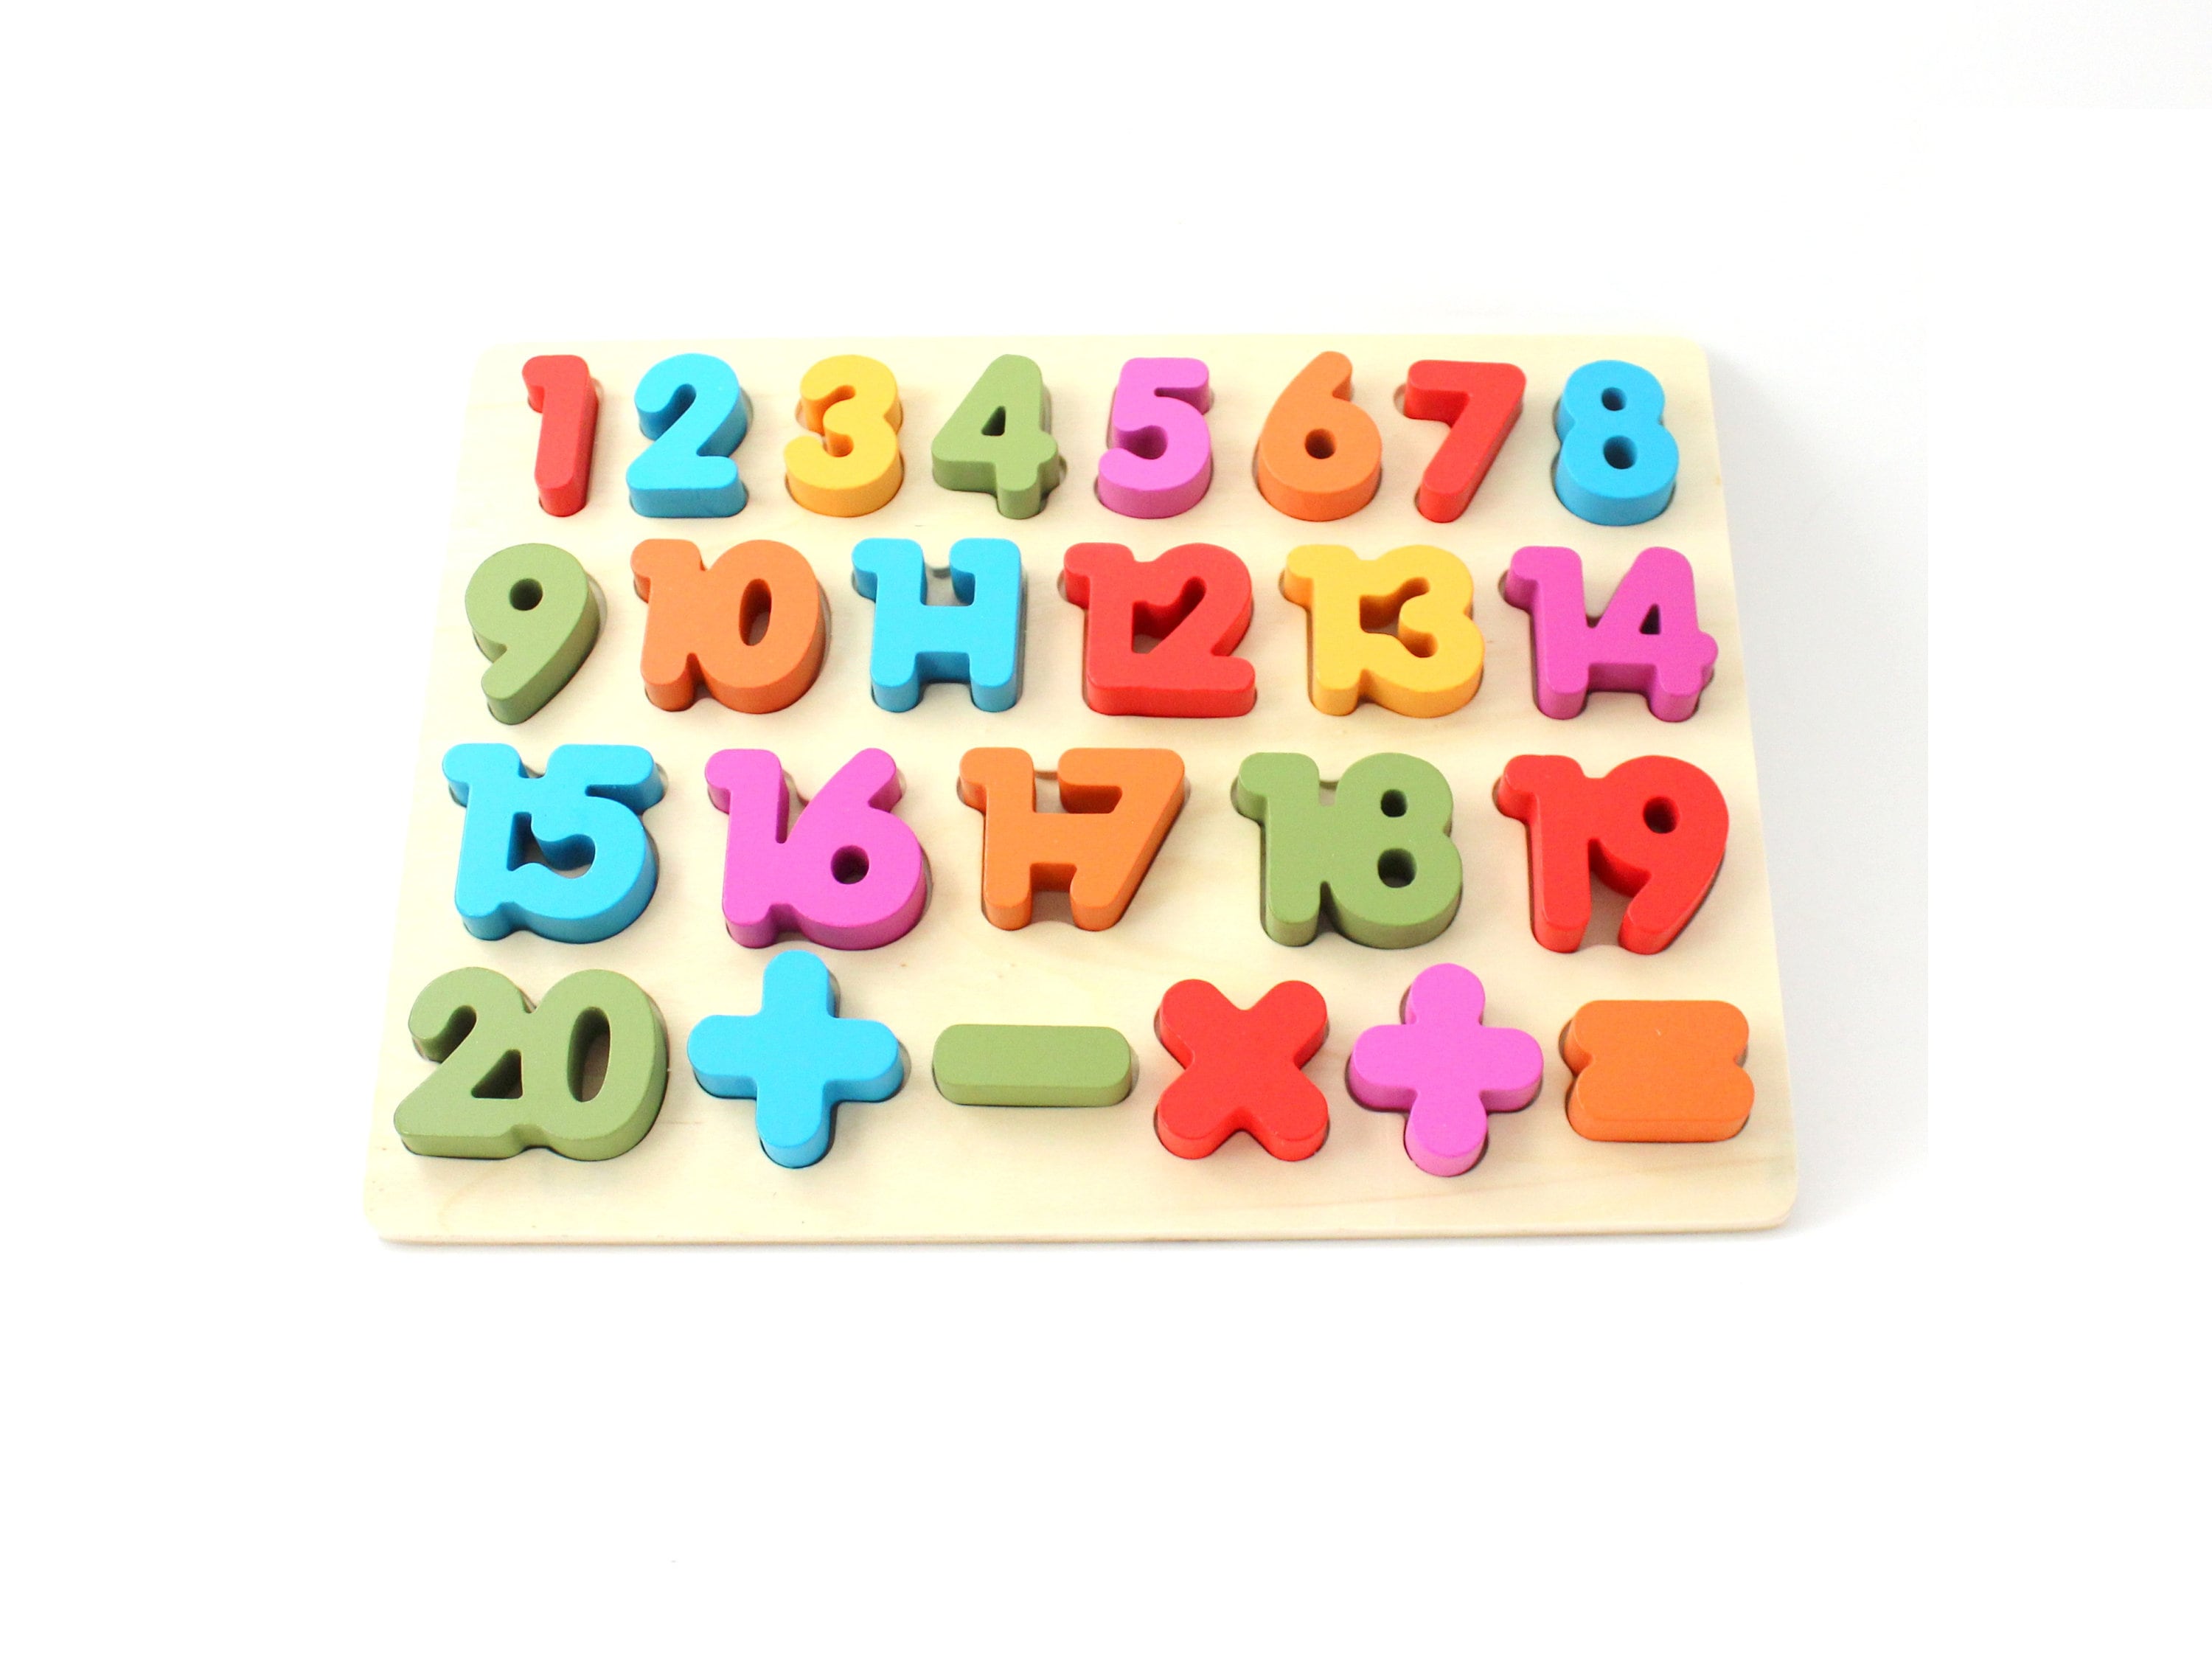 English Alphabet Wooden Toy Games for Kids Early Learning Mathematics Numbers 